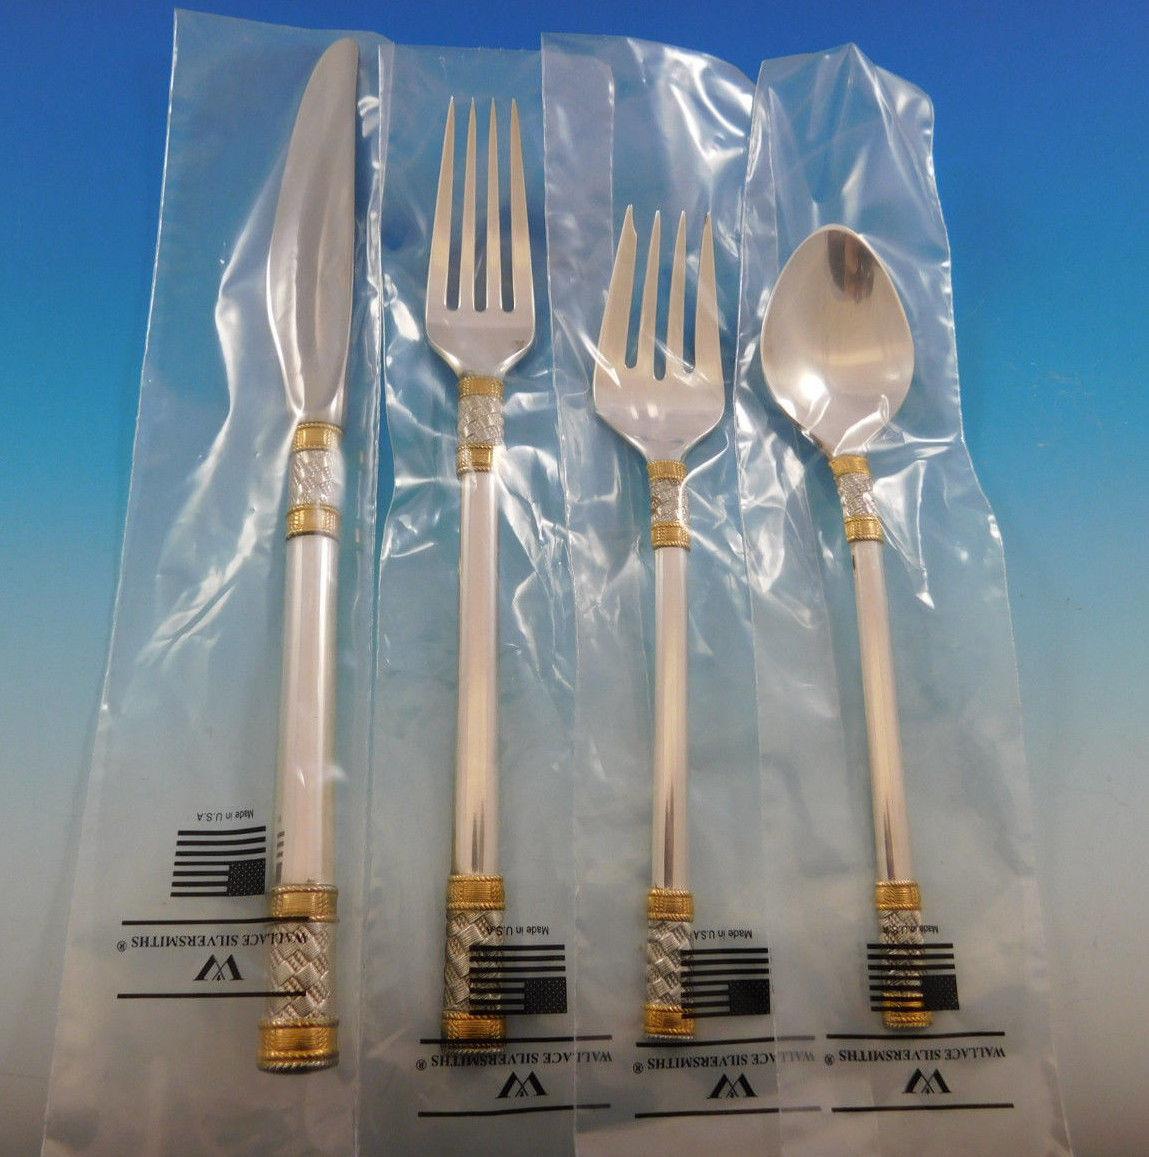 New Aegean weave gold by Wallace sterling silver flatware set - 32 pieces. This set includes:

Eight knives, 9 1/8